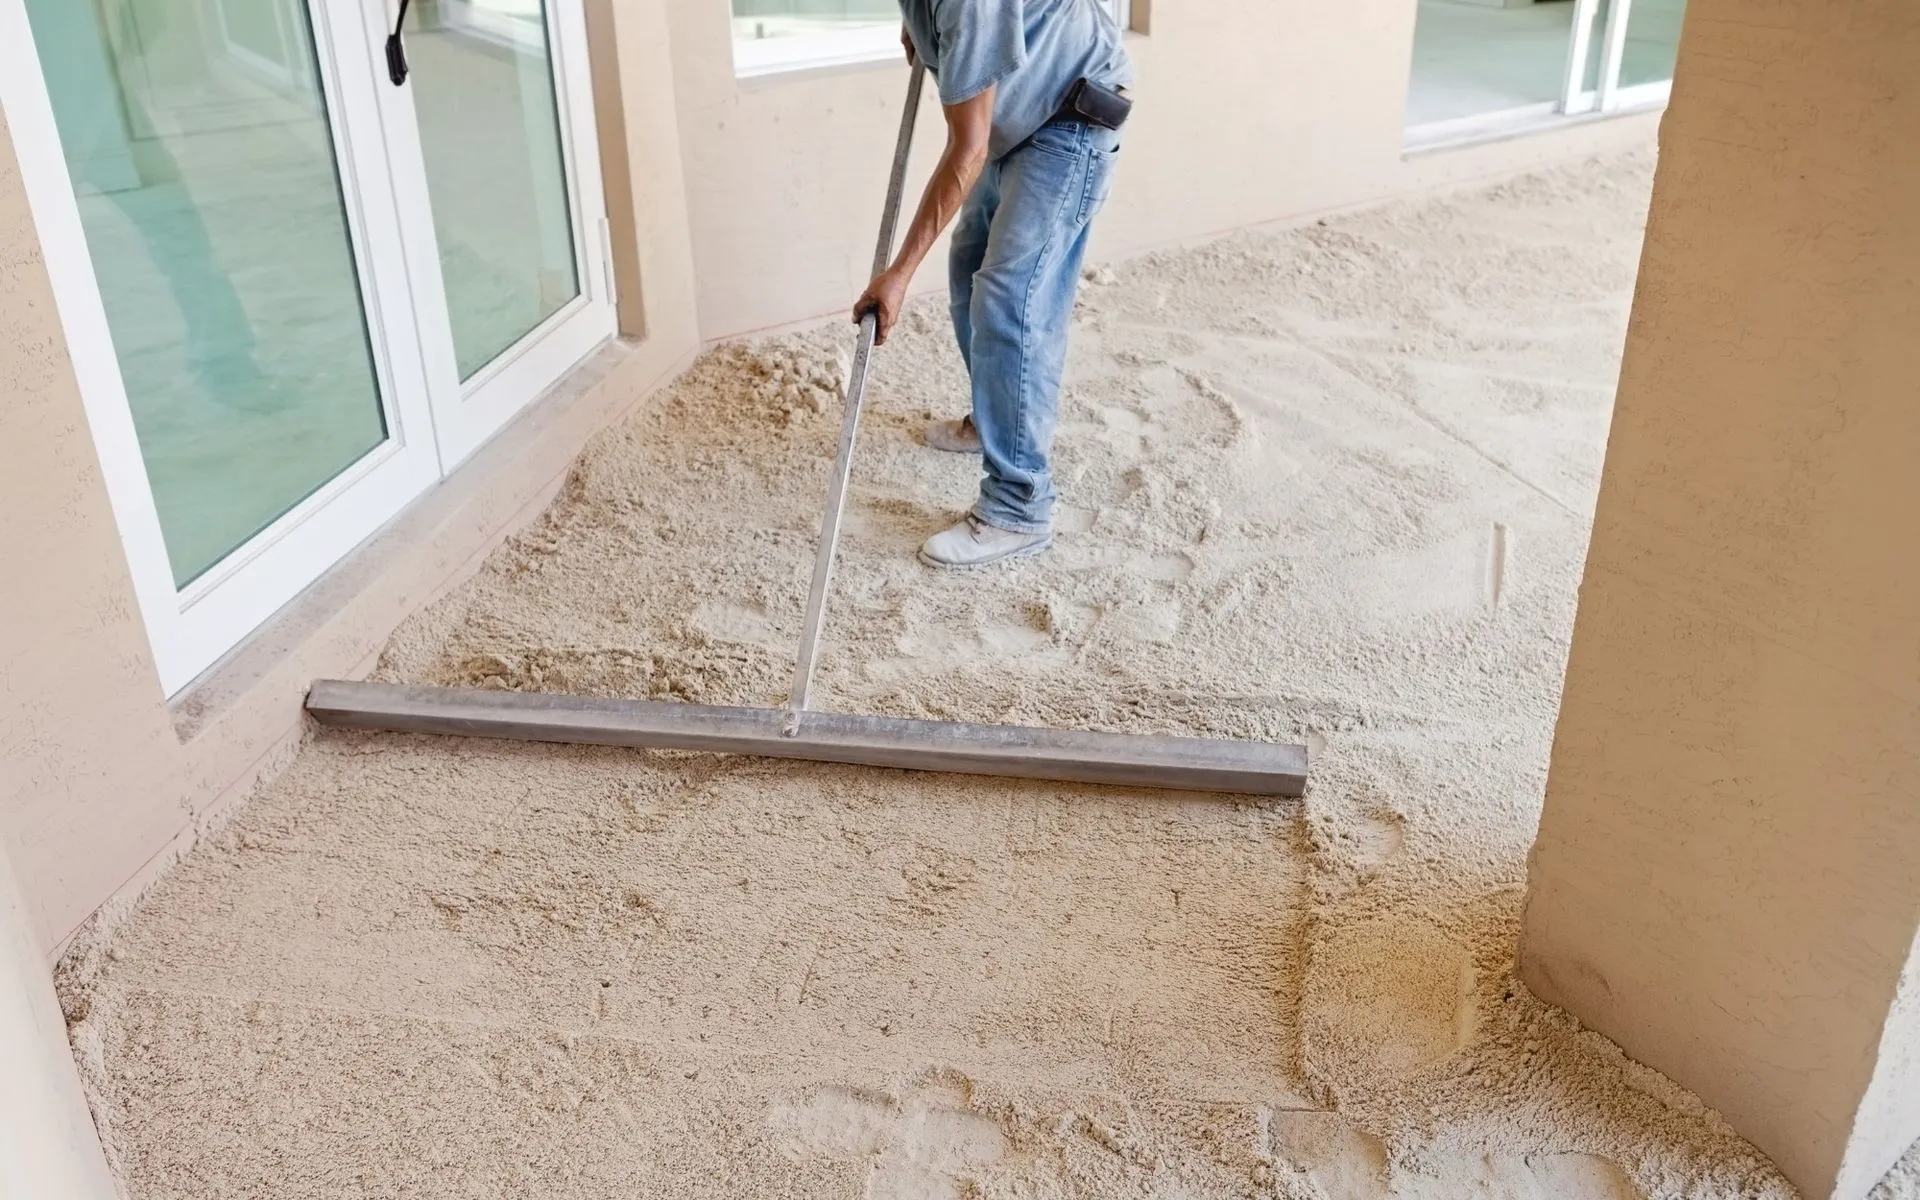 the pavers installer is spreading the sand over the site to help create a leveled pavement